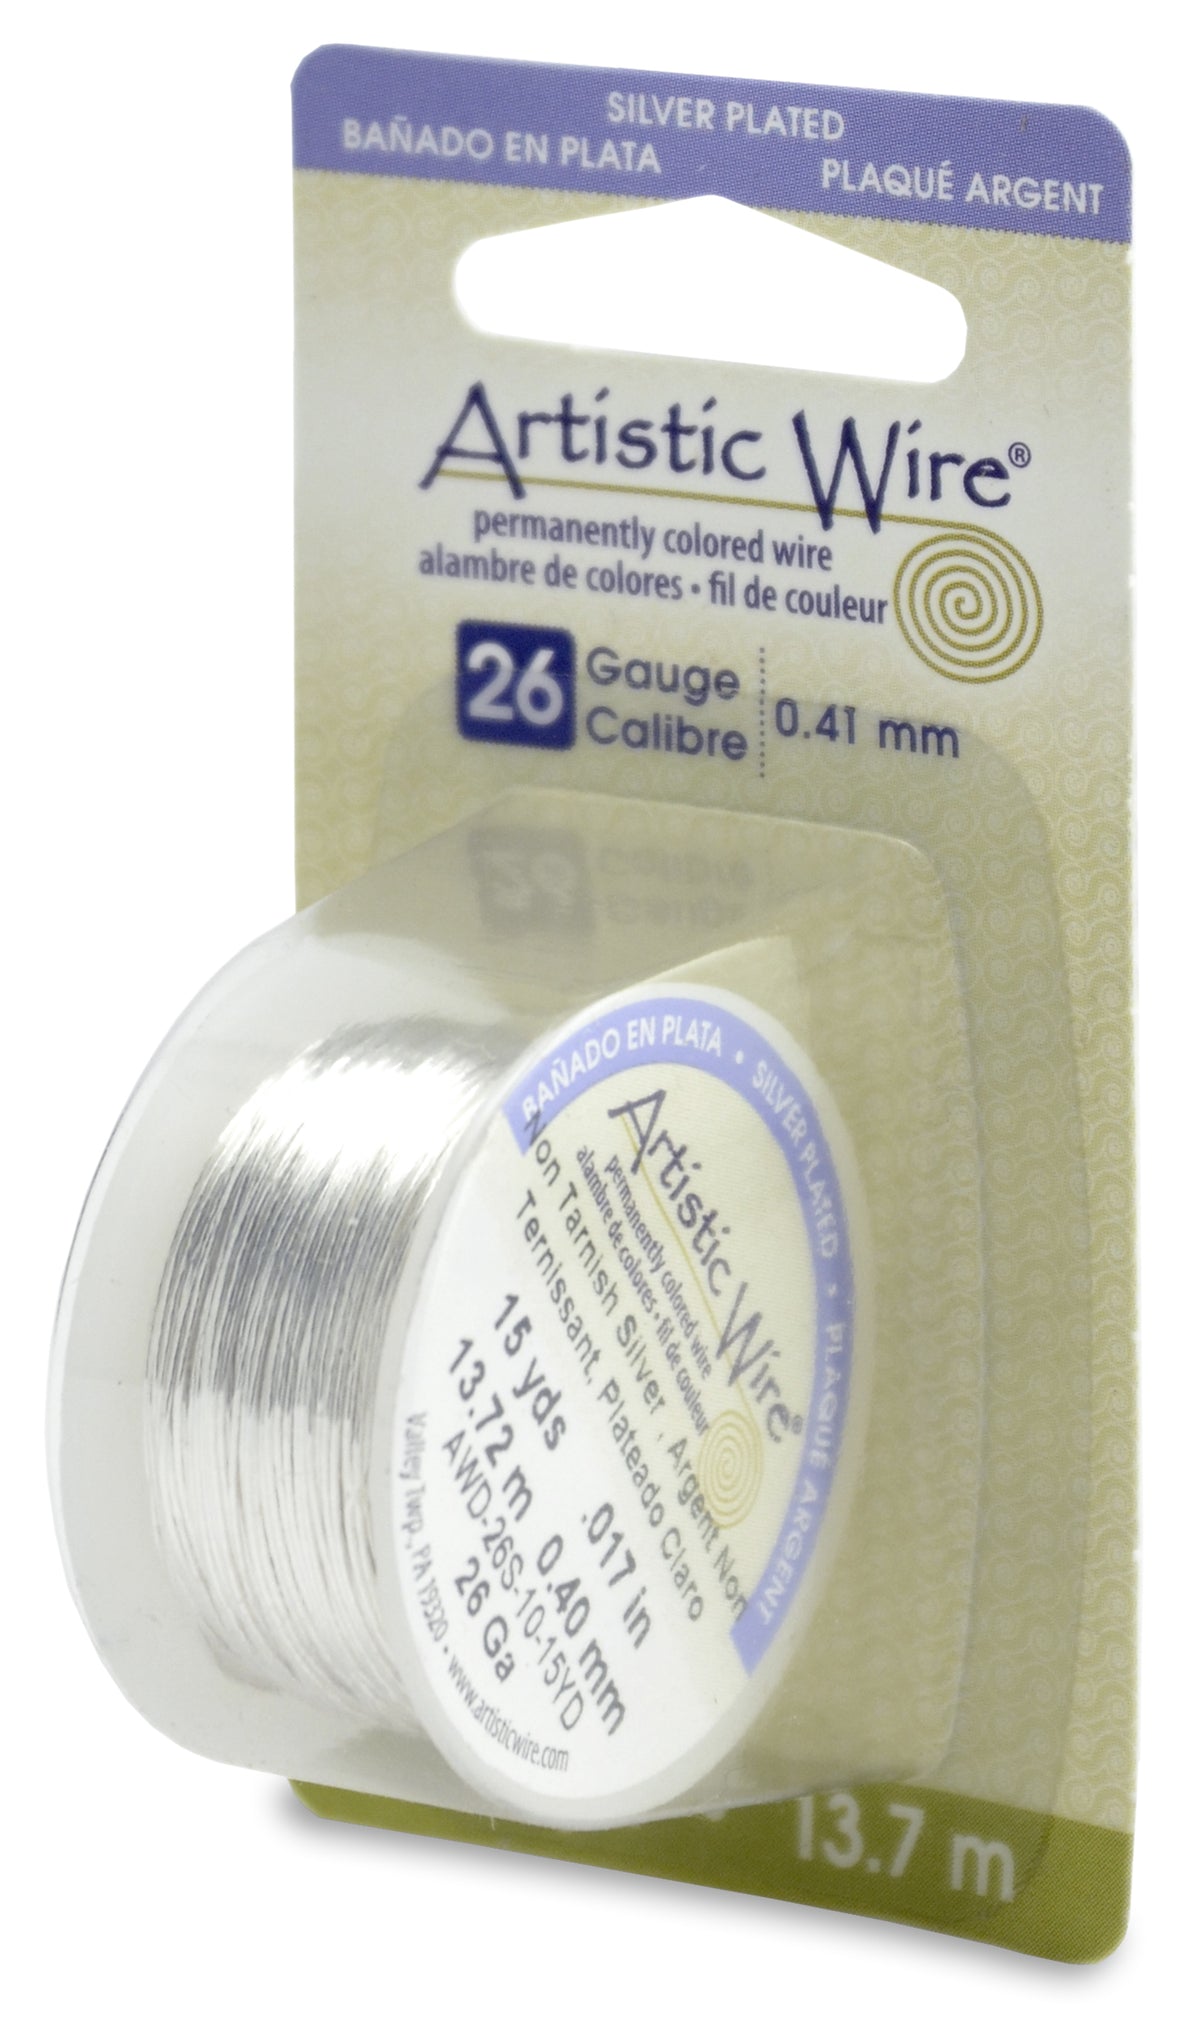 Artistic Wire, 26 Gauge (.41mm), Silver Plated, Tarnish Resistant Silver, 15 yd (13.7 m)